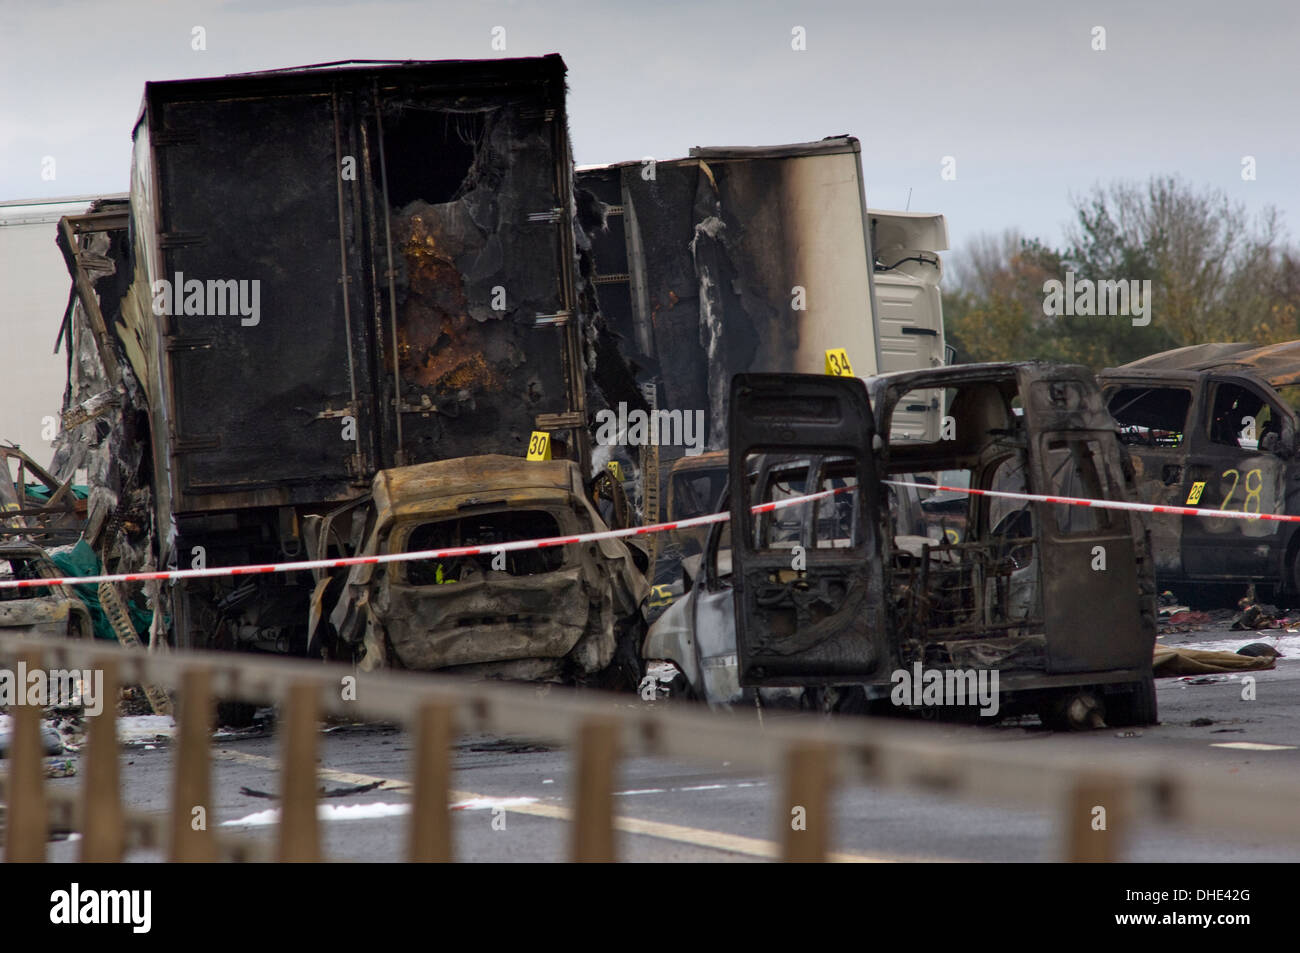 M5 motorway vehicle accident and crash and fire,involving 34 cars,vans and lorries, Somerset,UK,in which 7 people died in fog. Stock Photo